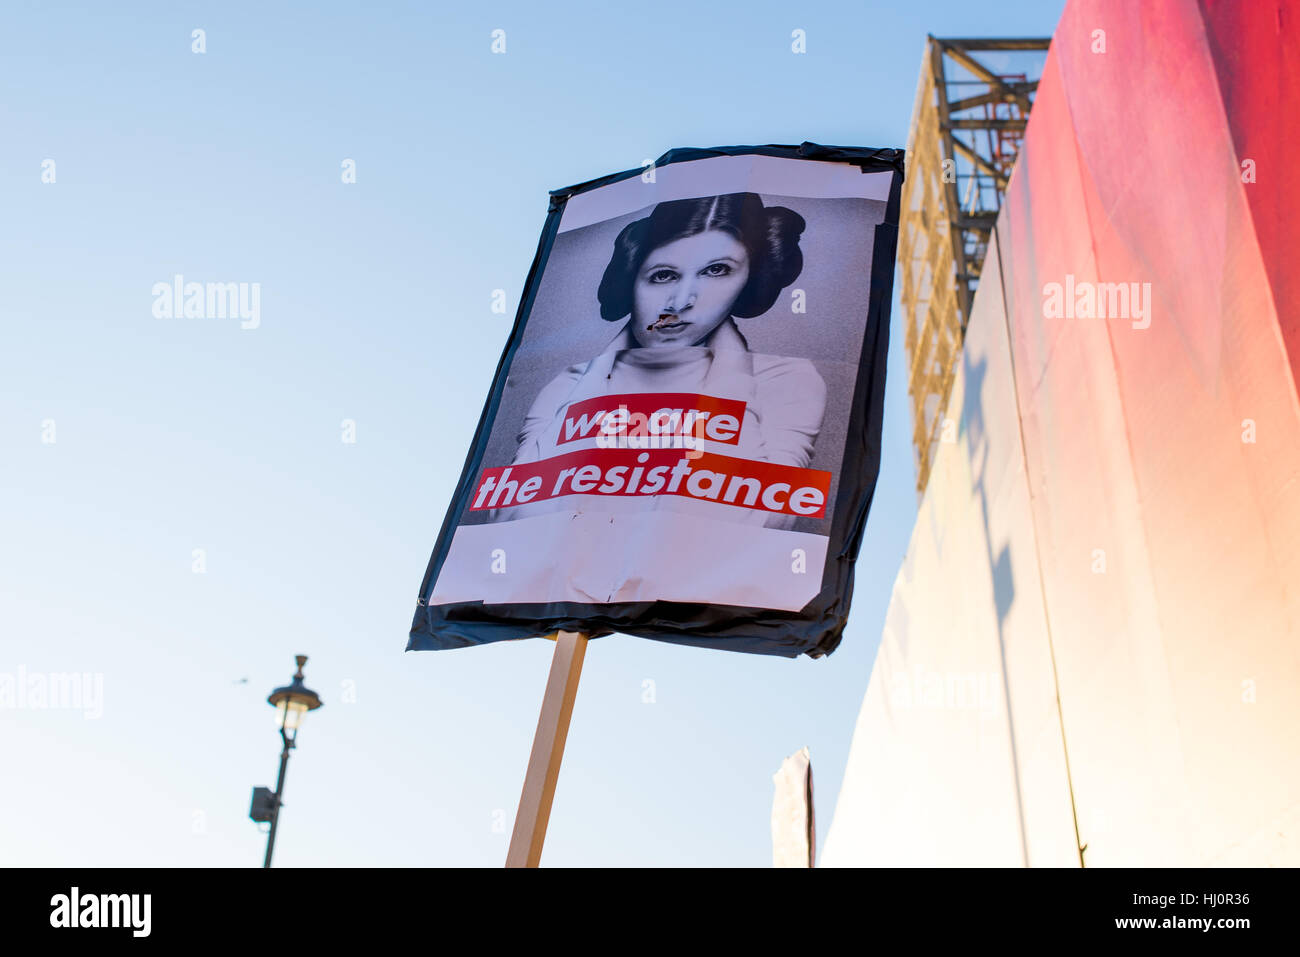 London, UK - 21 January 2017. Protest sign with Star Wars Princess Leia calling women for resistance against Trump. Thousands of protesters gathered in Trafalgar Square to attend Women's March against Donald Trump calling for human rights and equality. Stock Photo